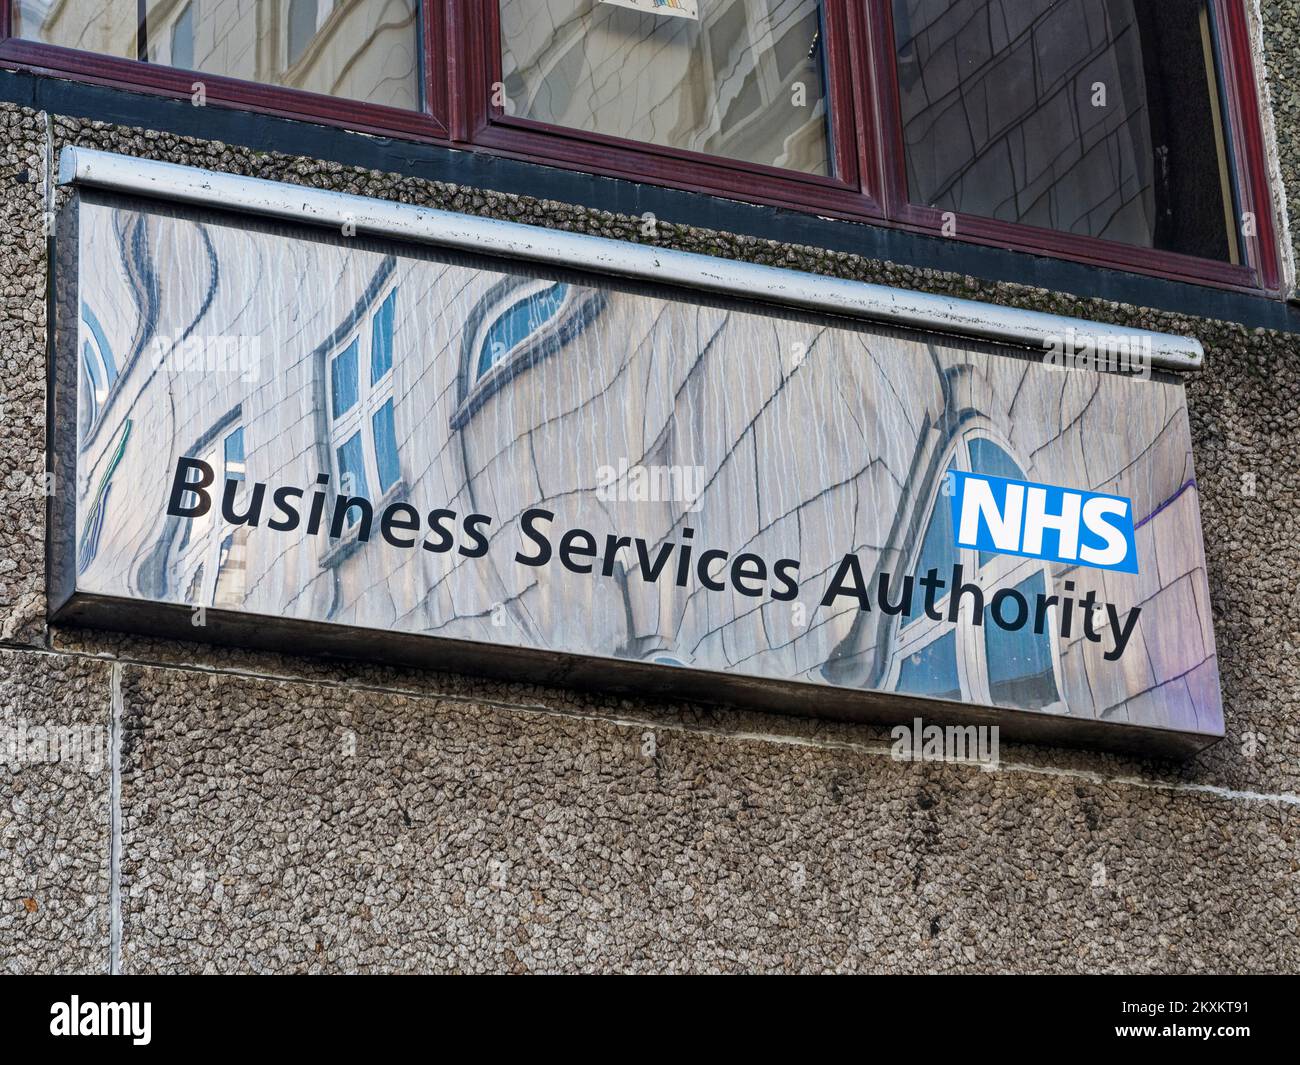 NHS Business Services sign at Newcastle upon Tyne, UK Stock Photo